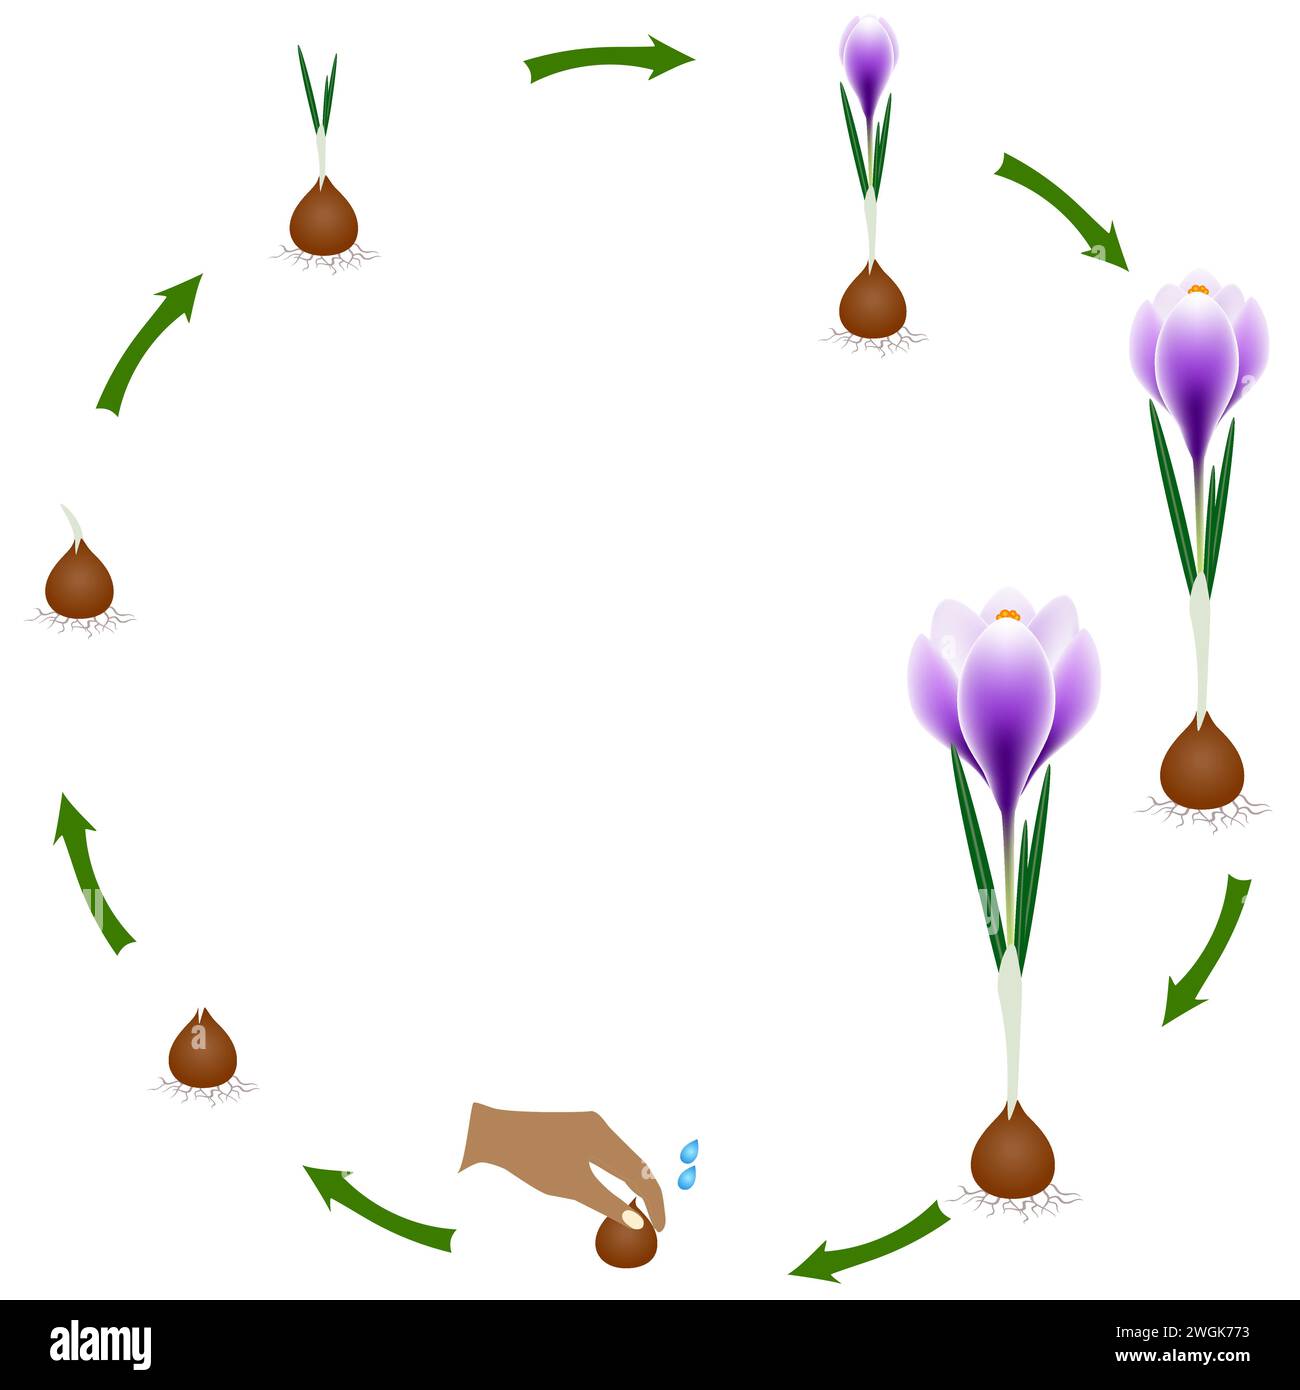 Life cycle of a crocus plant on a white background. Stock Vector